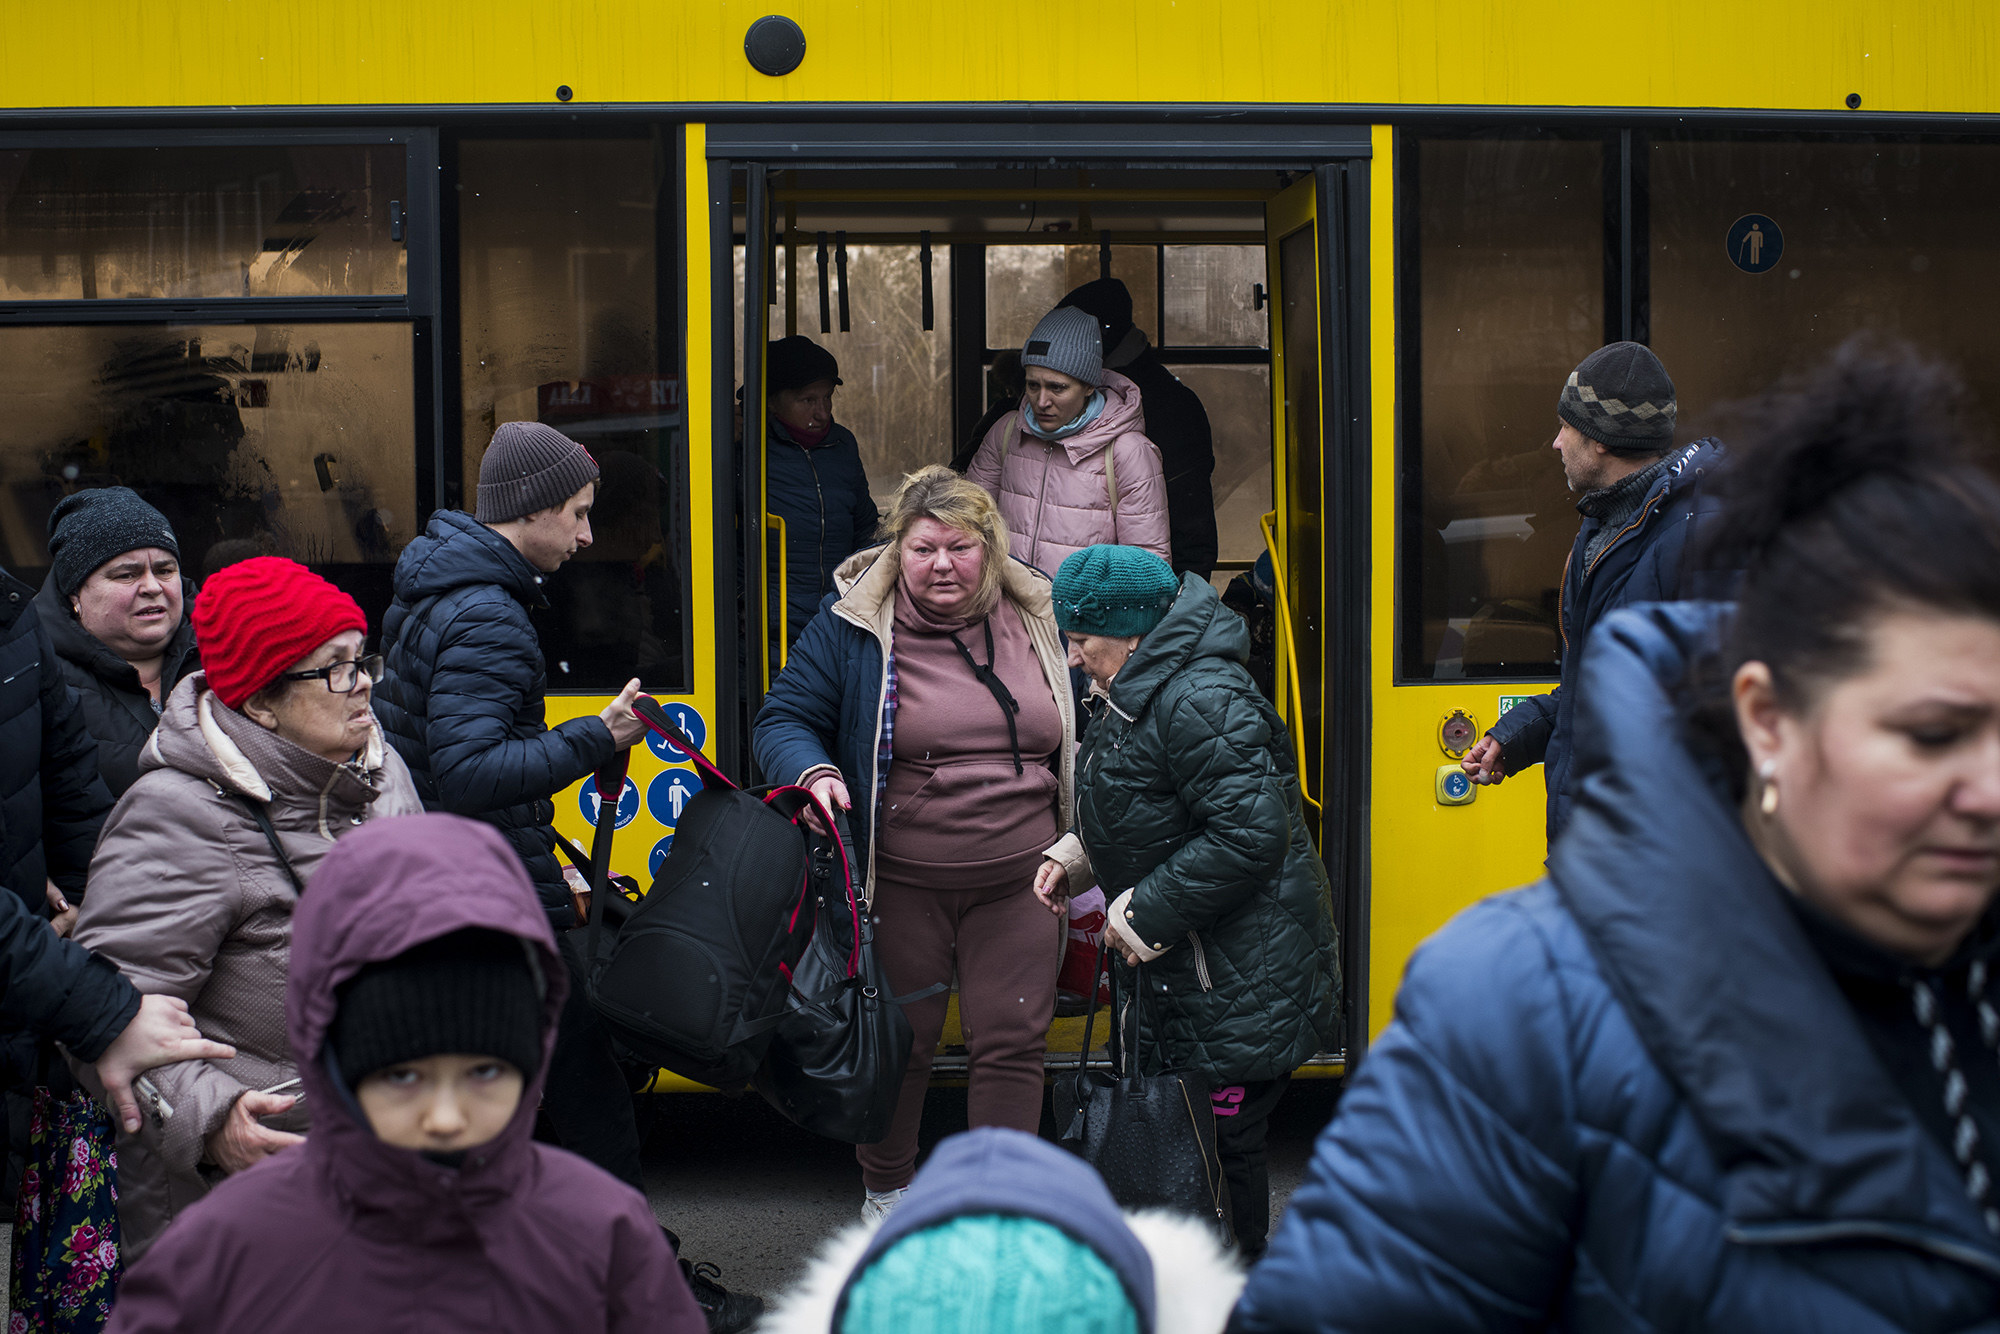 People, some elderly and carrying bags, emerge from a bus